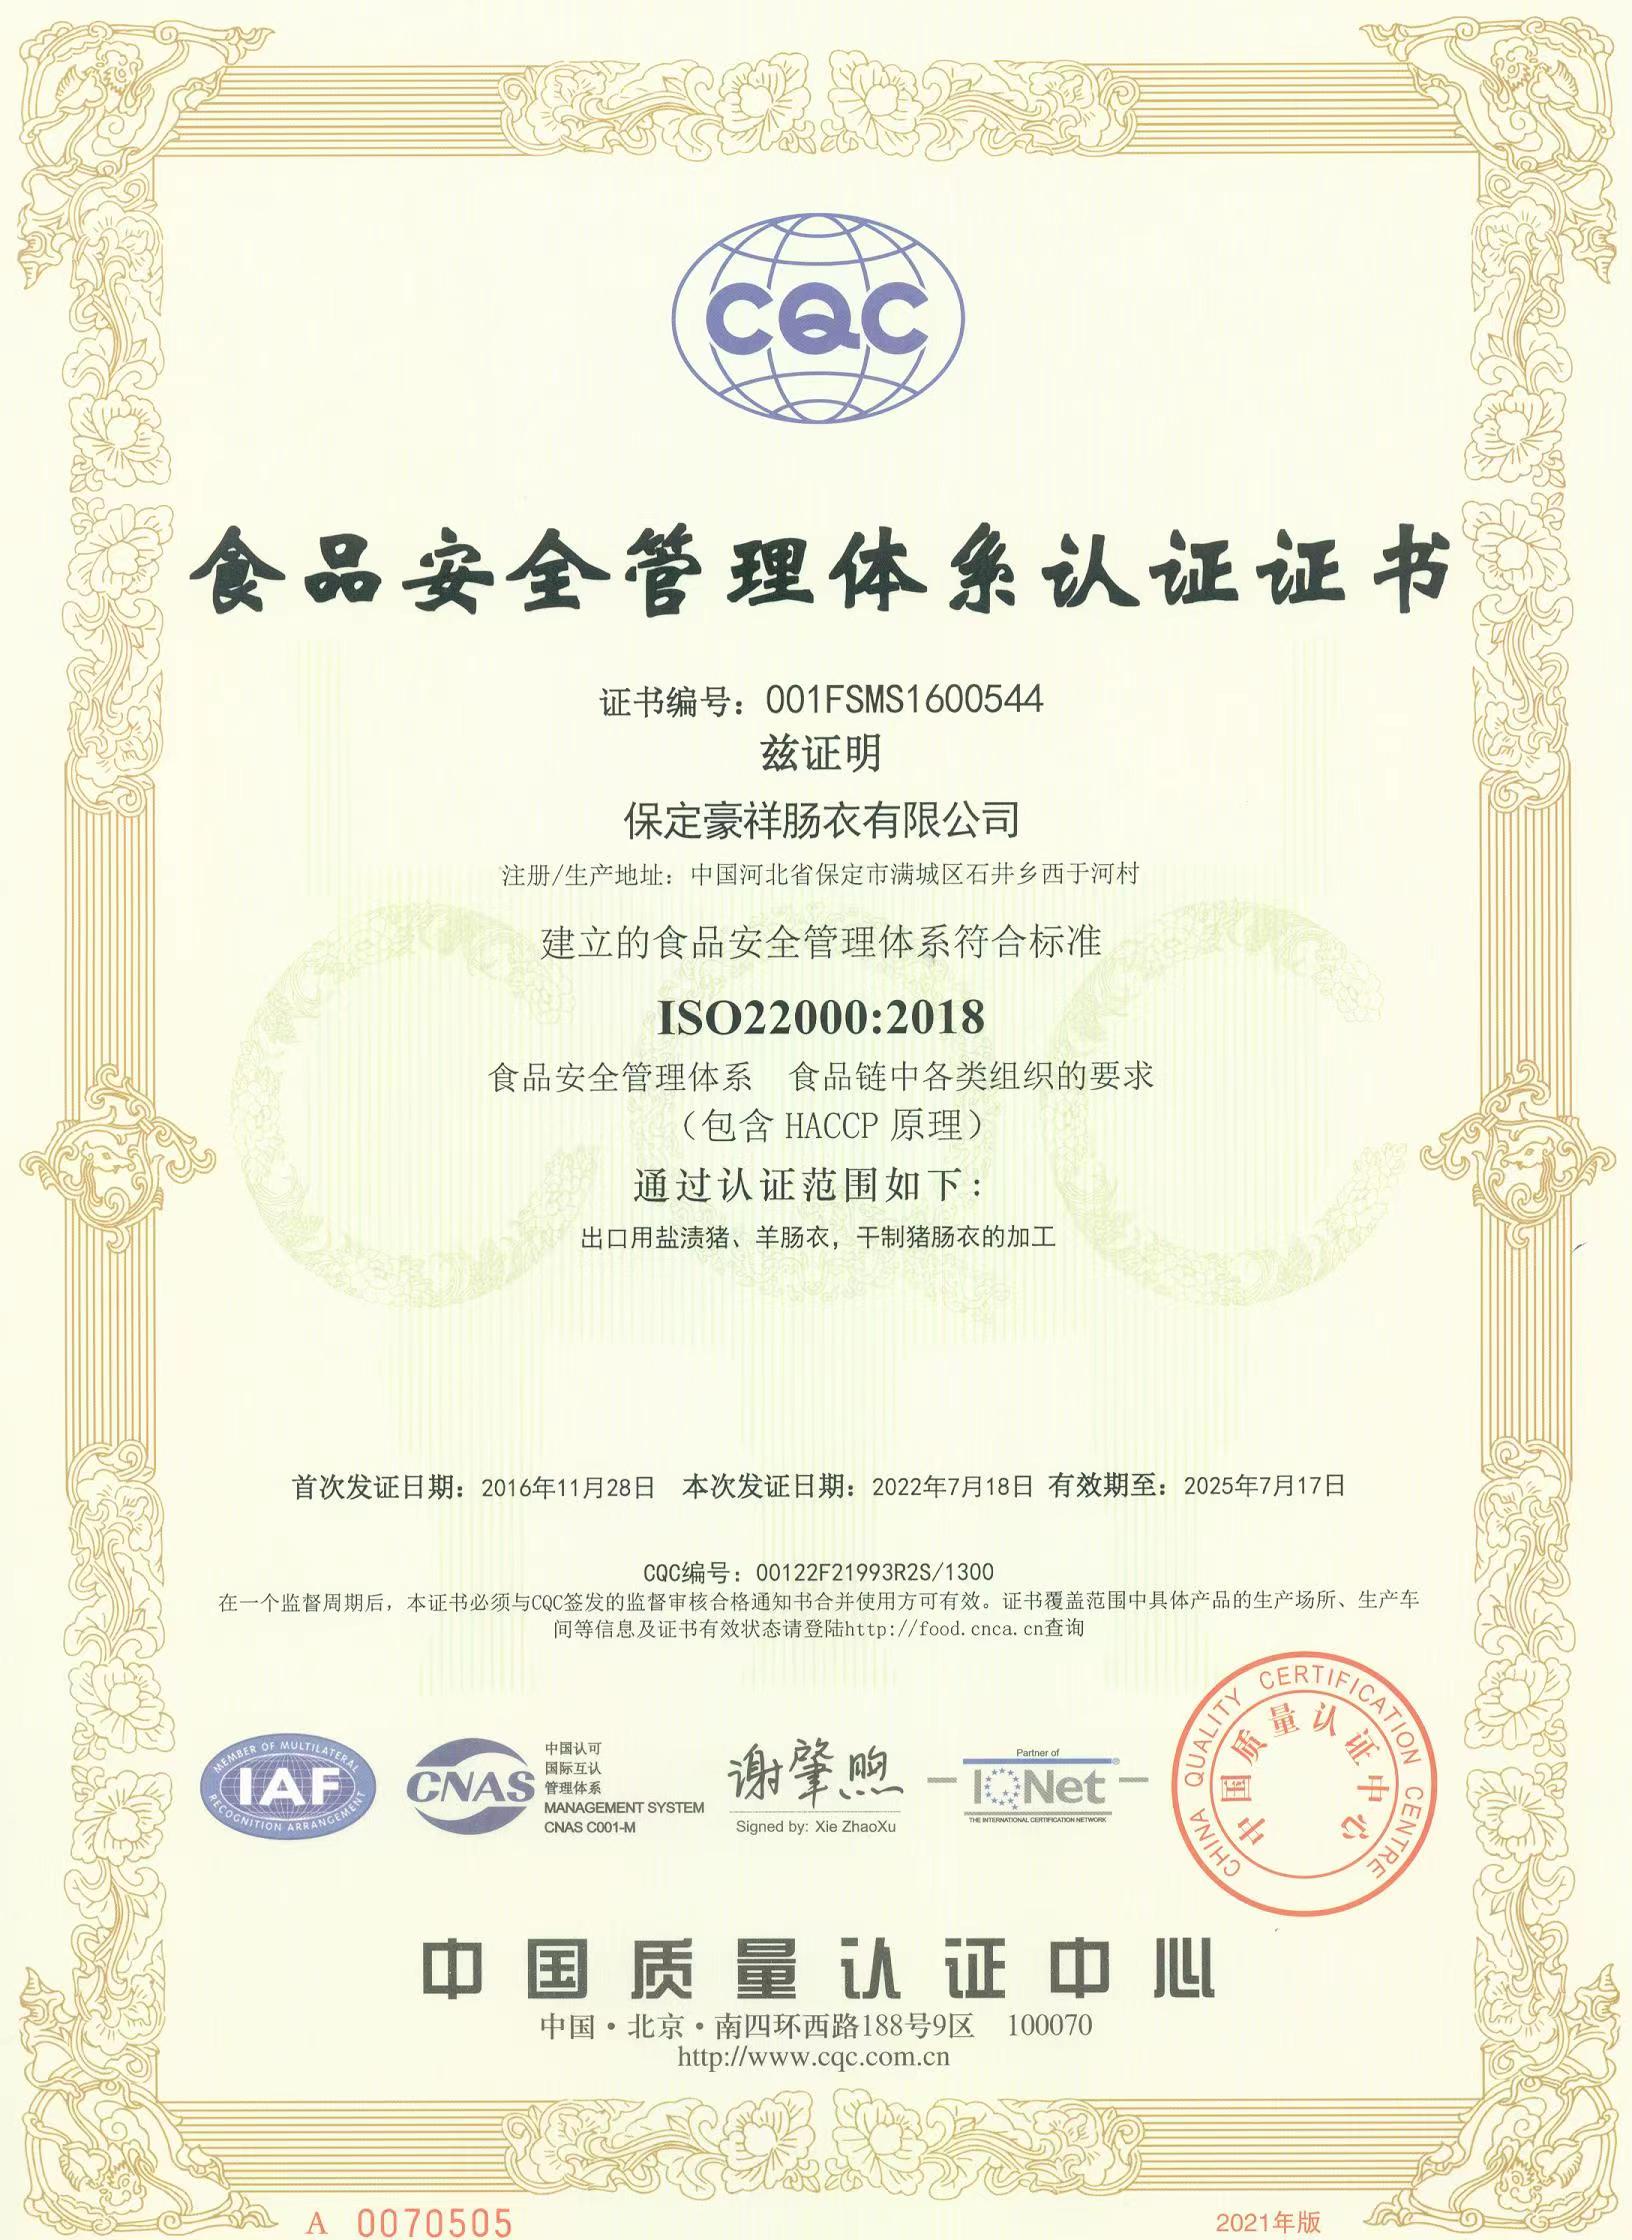 Chinese version of food safety management system certificate